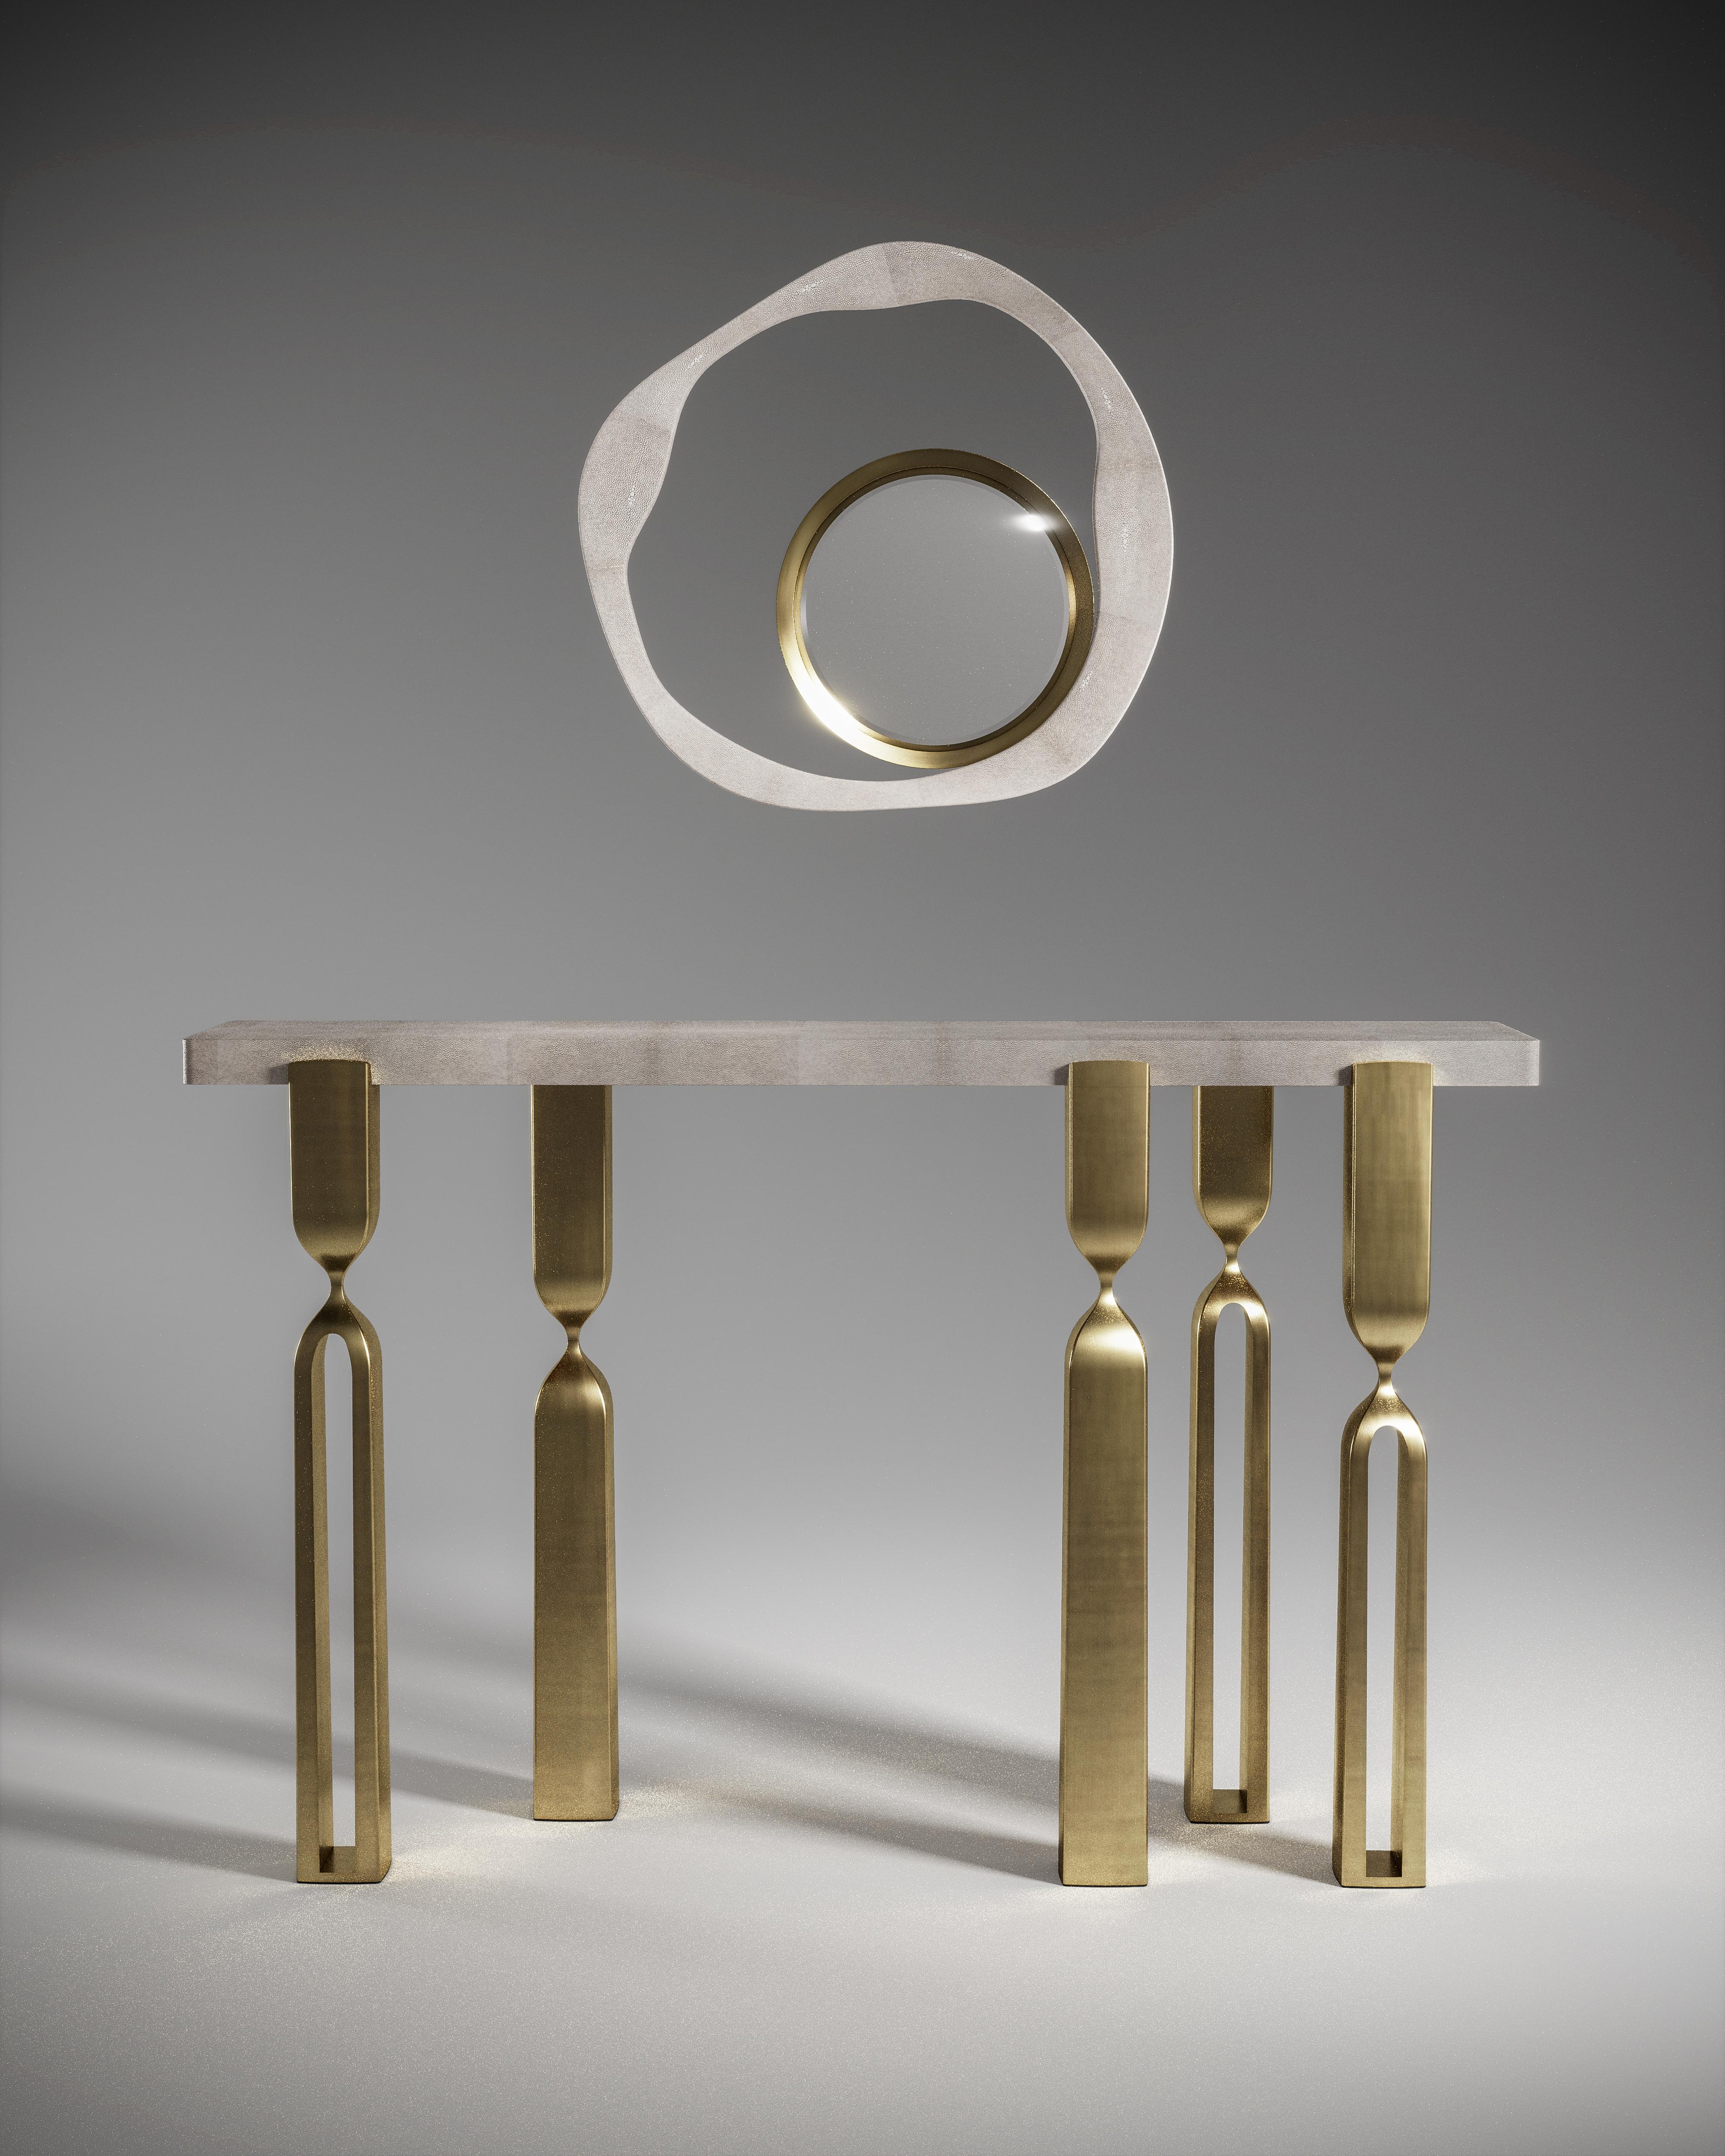 Inspired by the original Rhapsody lamp, by her fiancee Patrick Coard Paris, Kifu Paris designs a sculptural console as an ode to his iconic lighting collection. The console tabletop is inlaid in coal black shagreen and sits on 5 bronze-patina brass